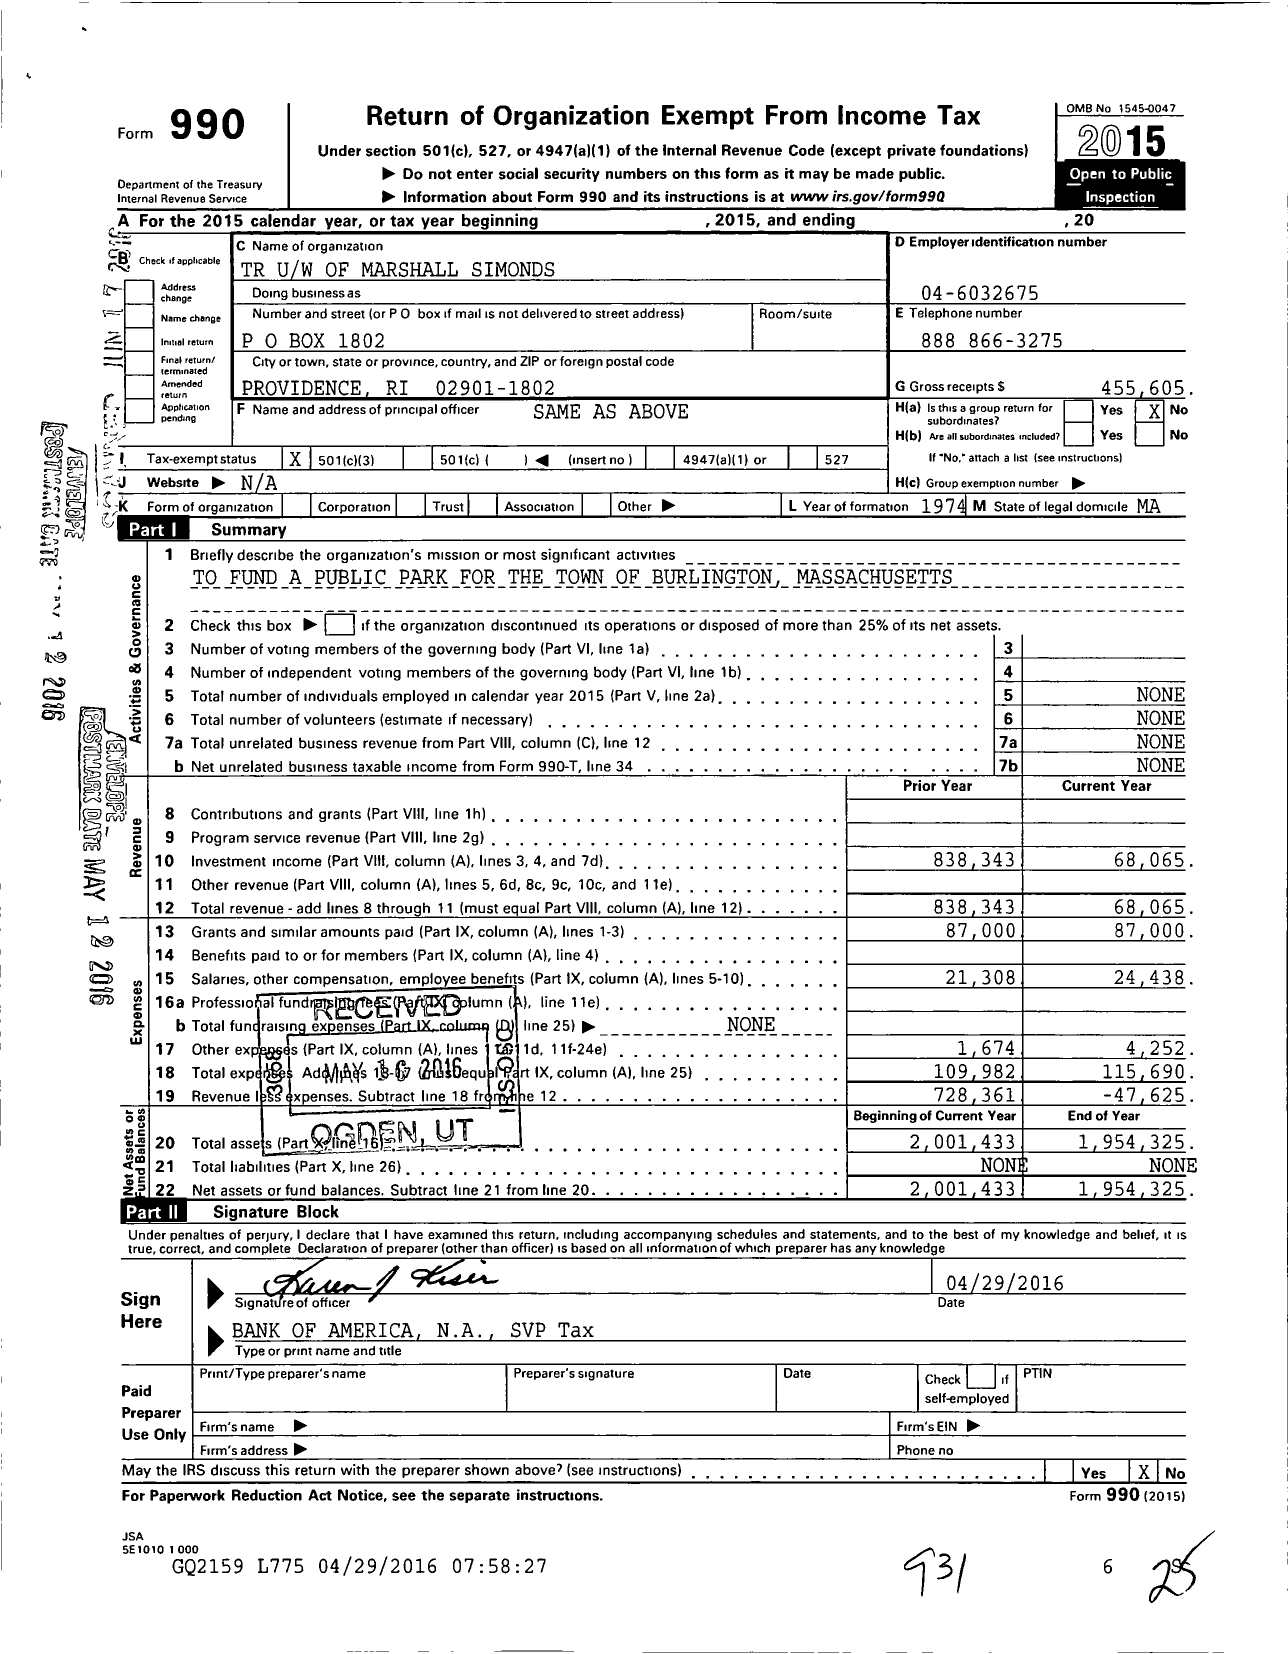 Image of first page of 2015 Form 990 for TR Uw of Marshall Simonds